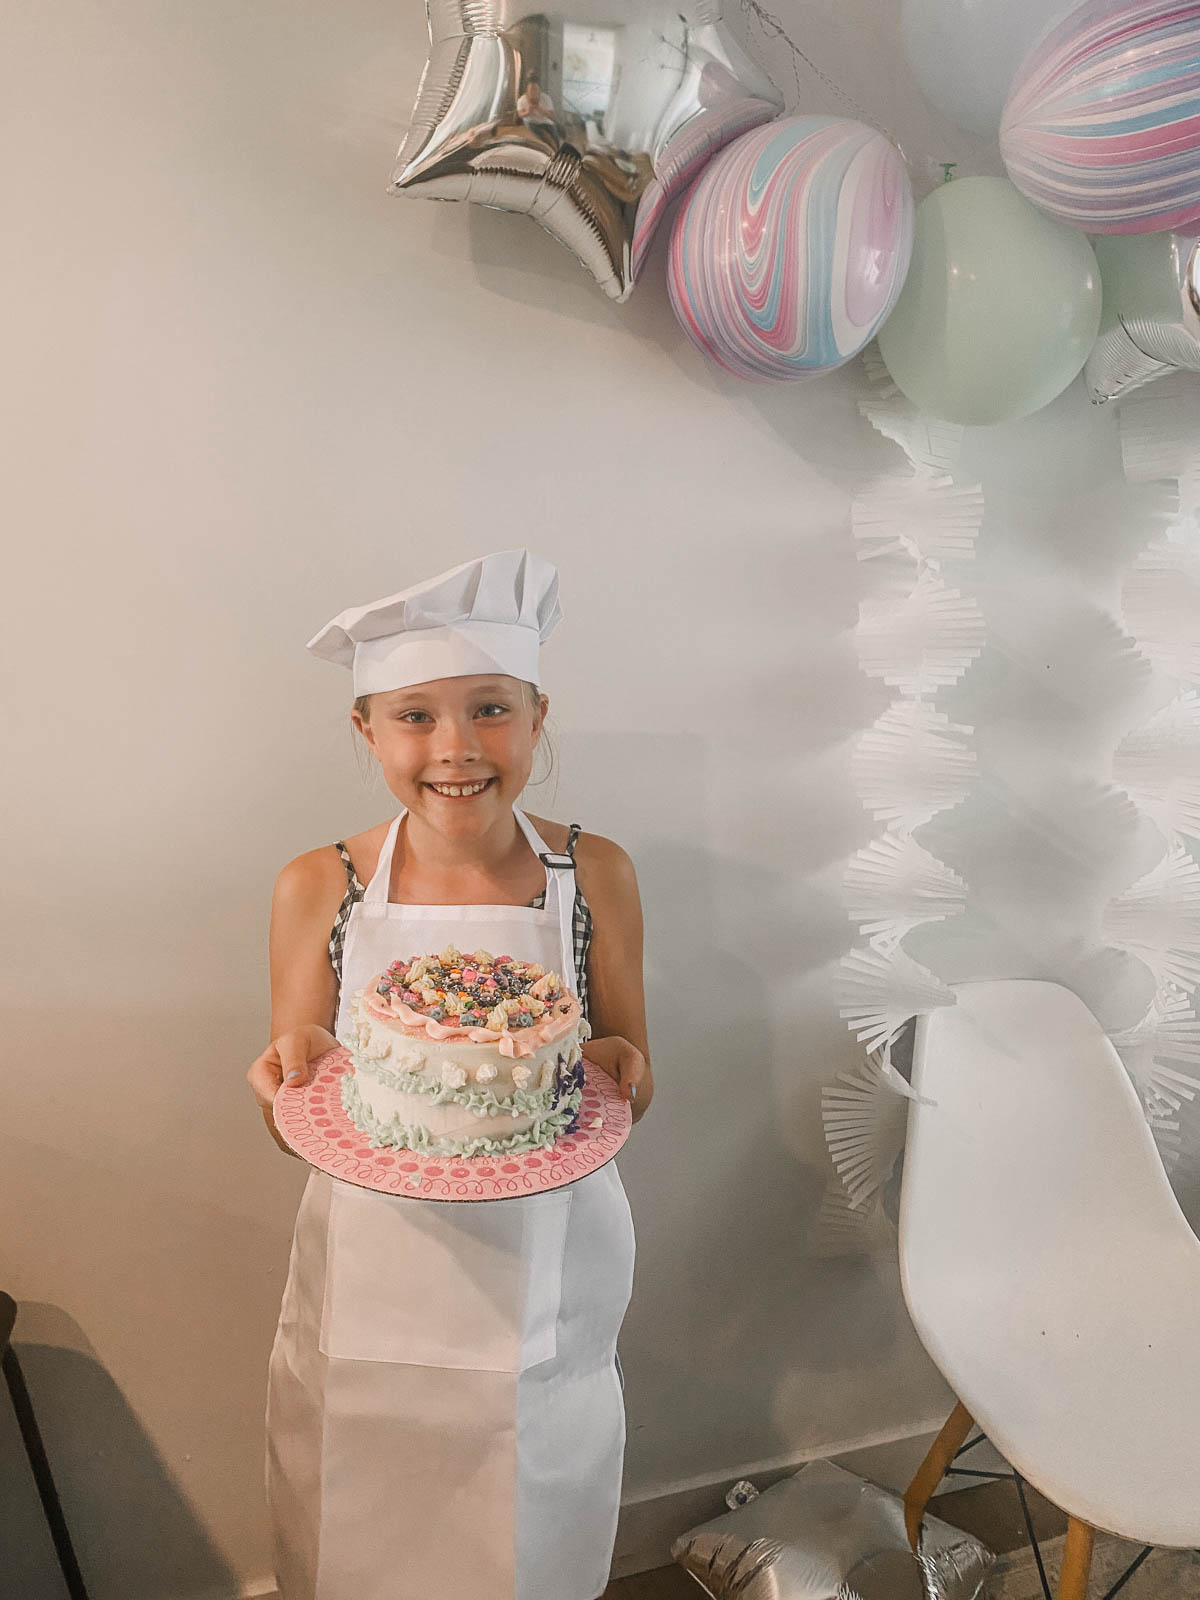 girl holding cake she decorated at a cake decorating party